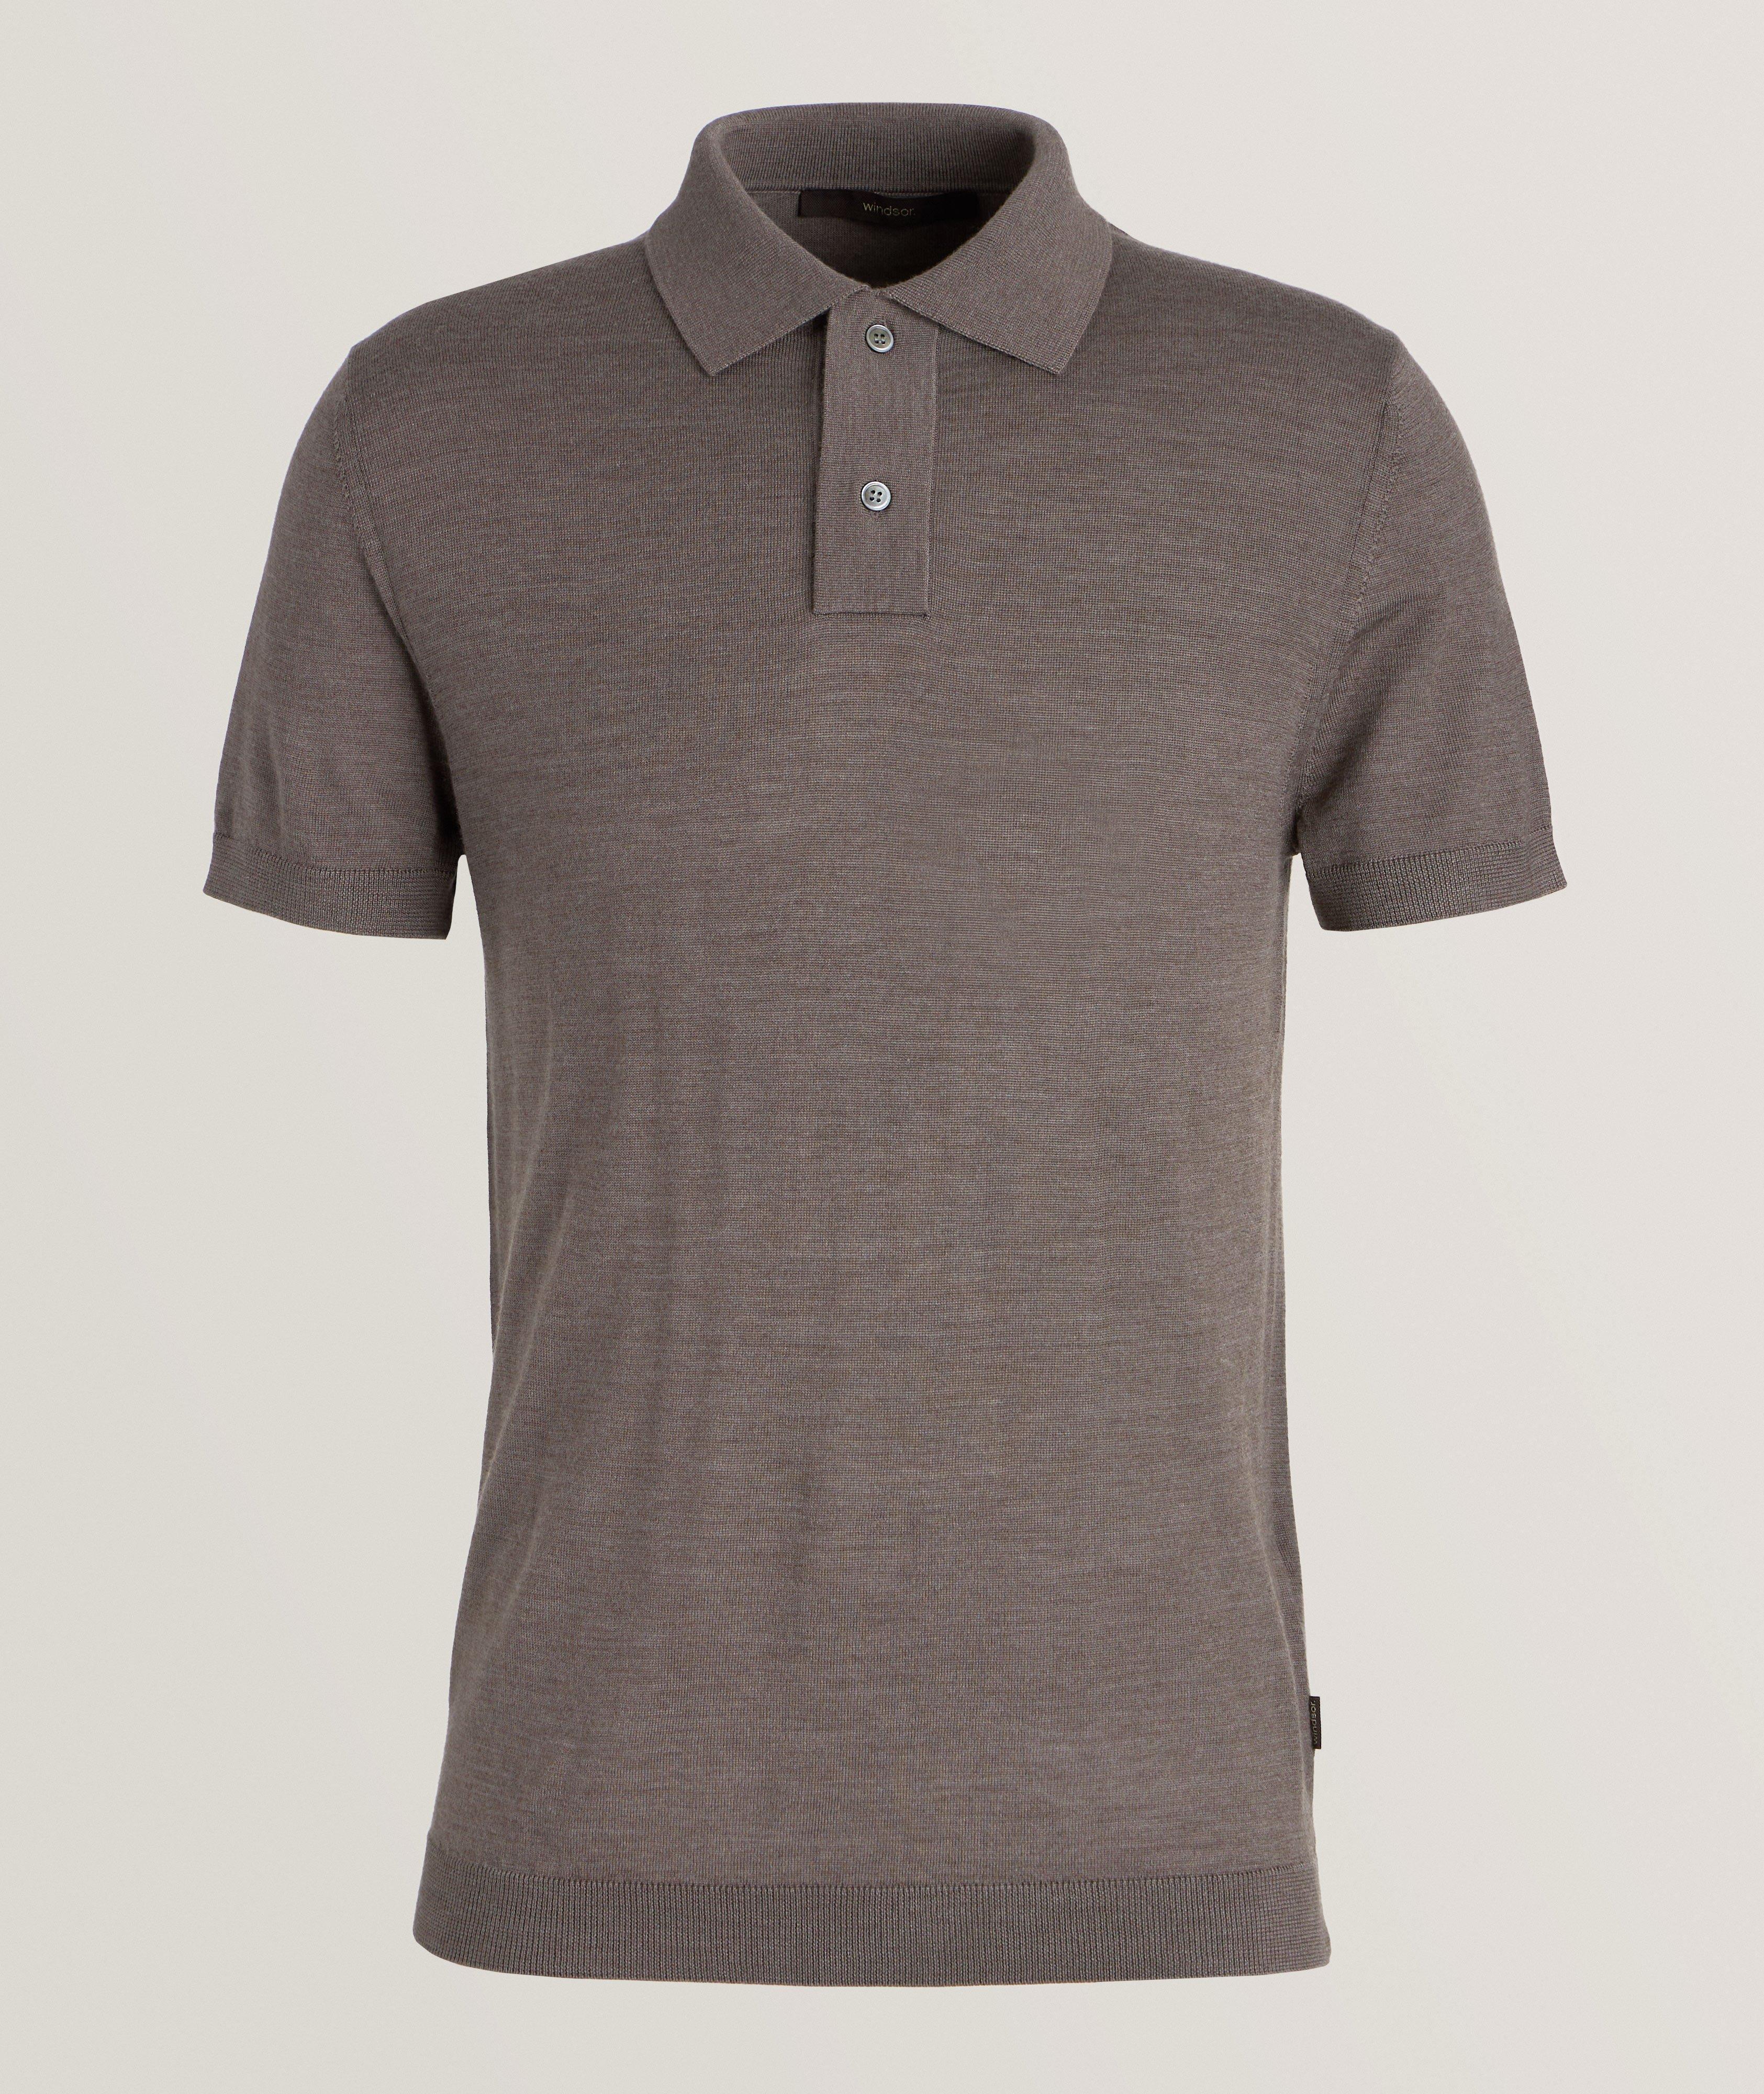 Nando Wool, Silk & Cashmere Knitted Polo image 0